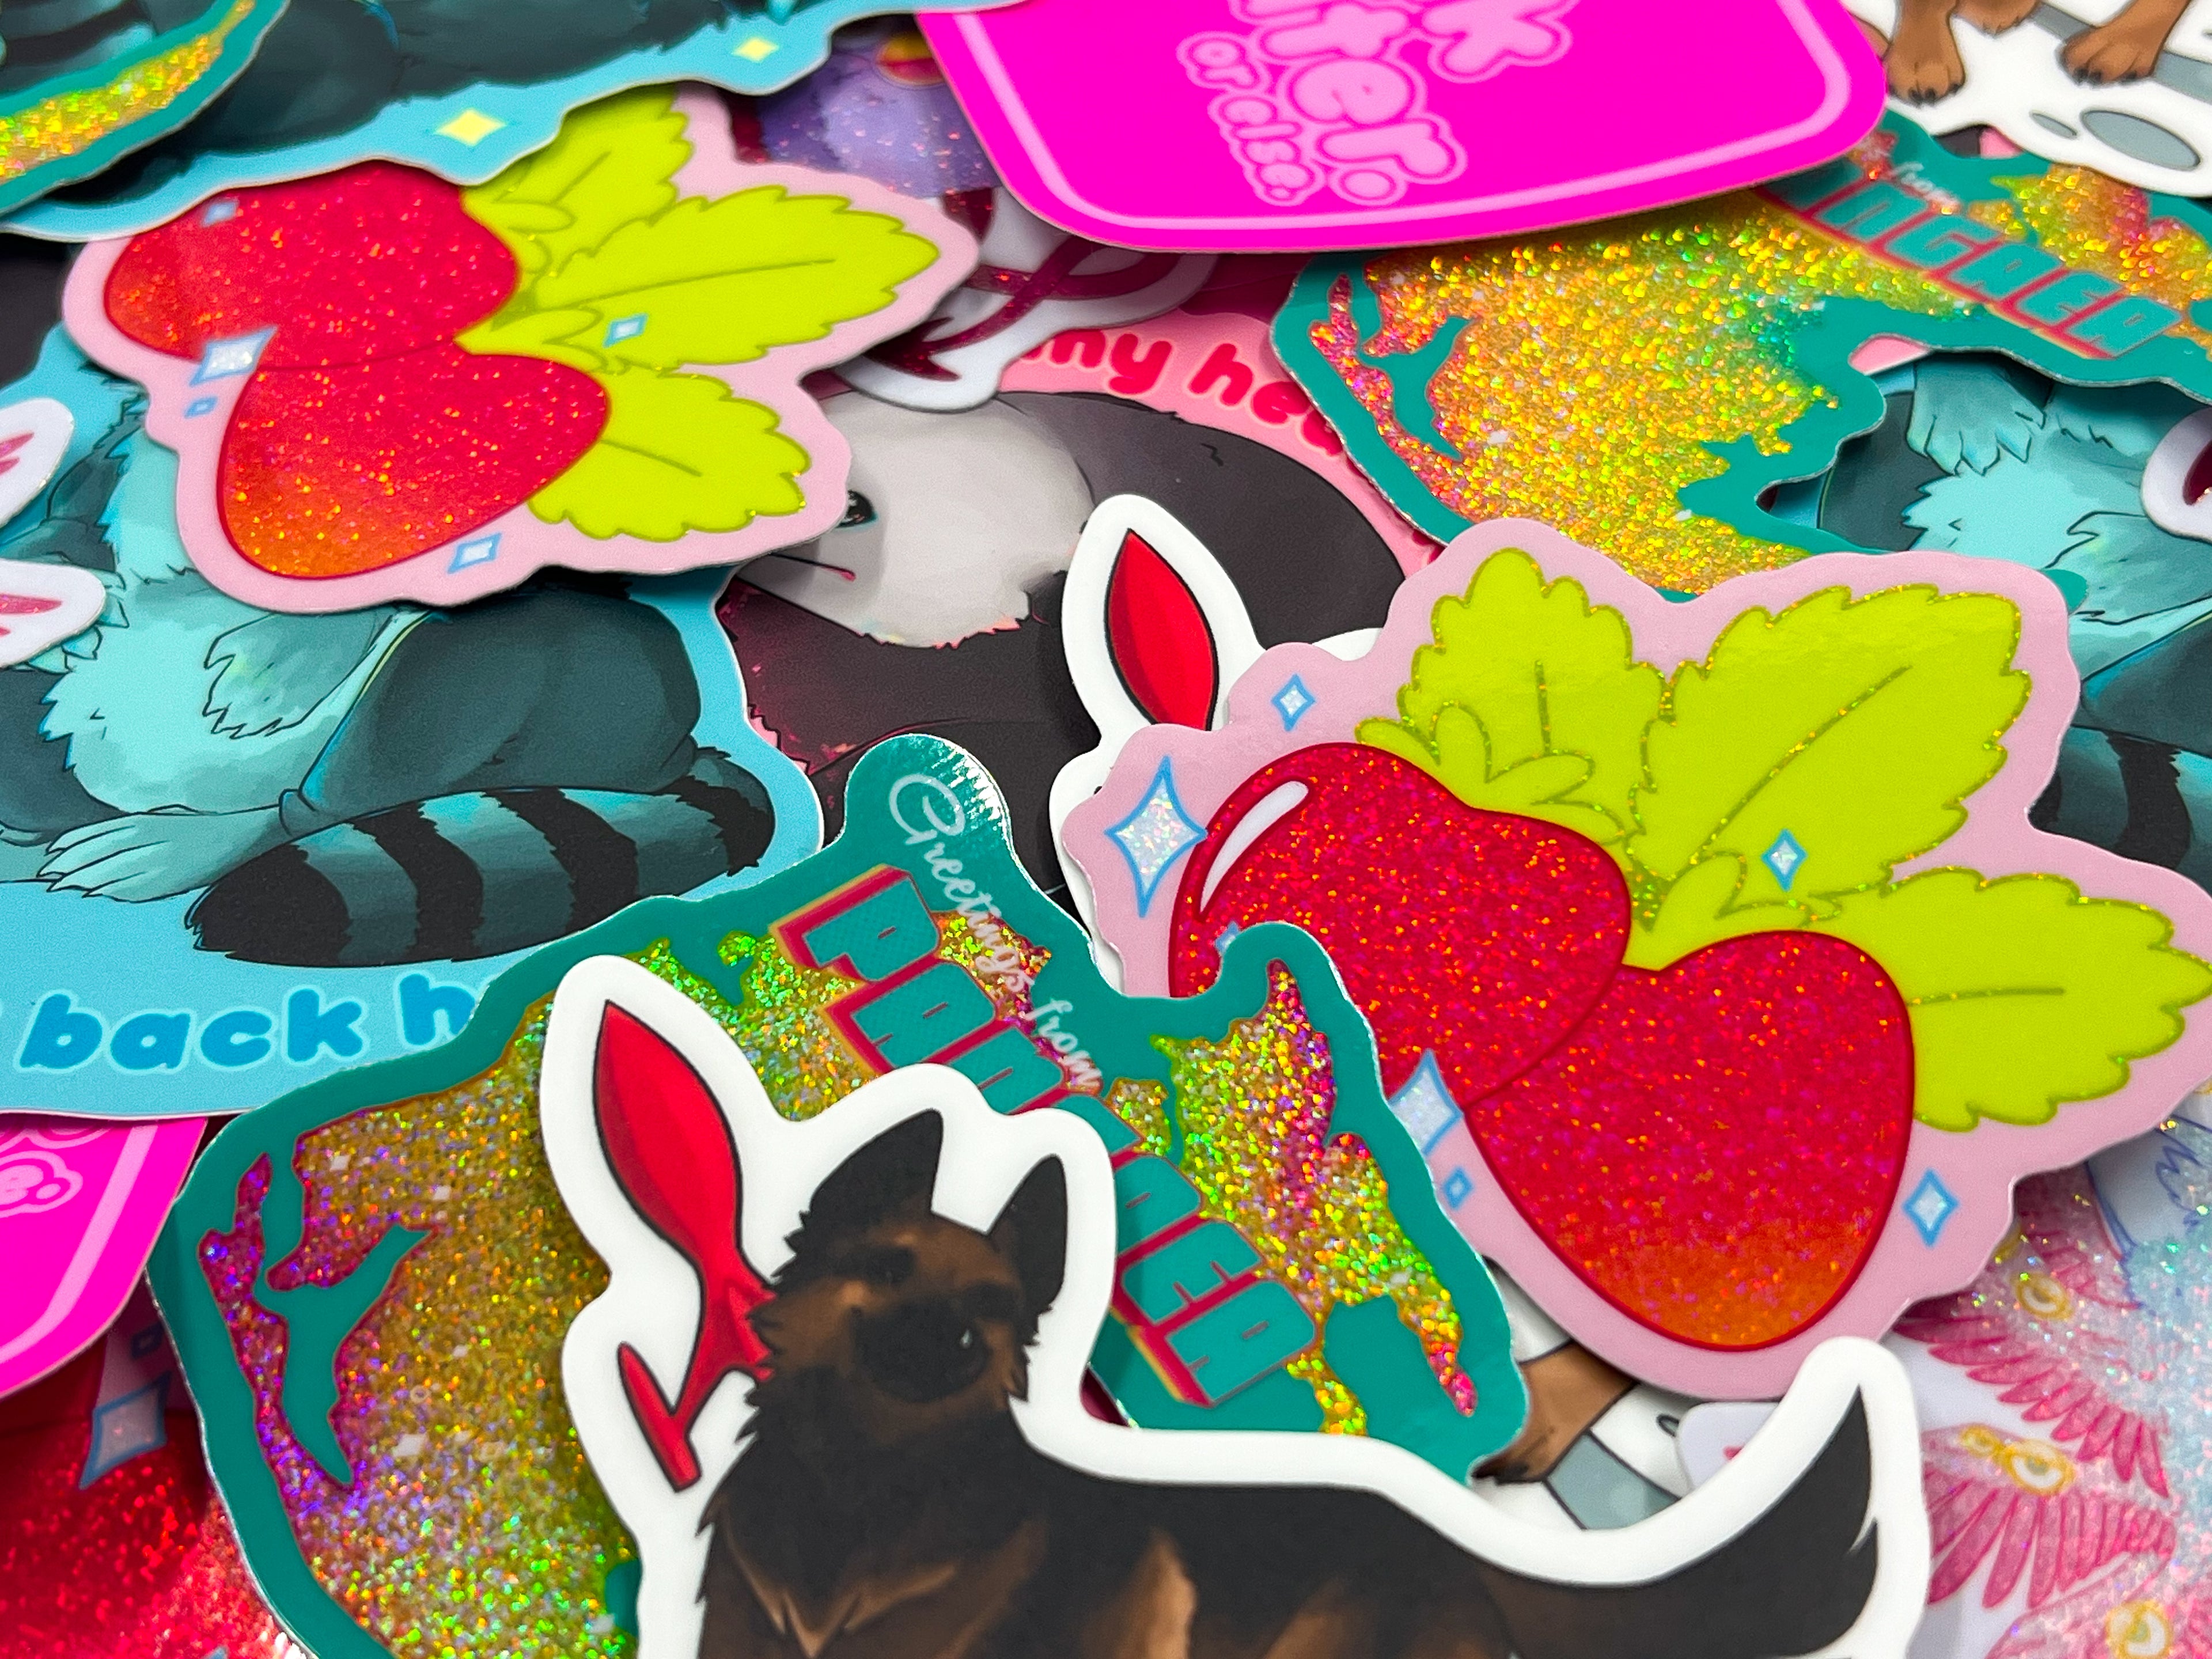 Image of various vinyl stickers, each one with a different special effect such as holographic or glitter.